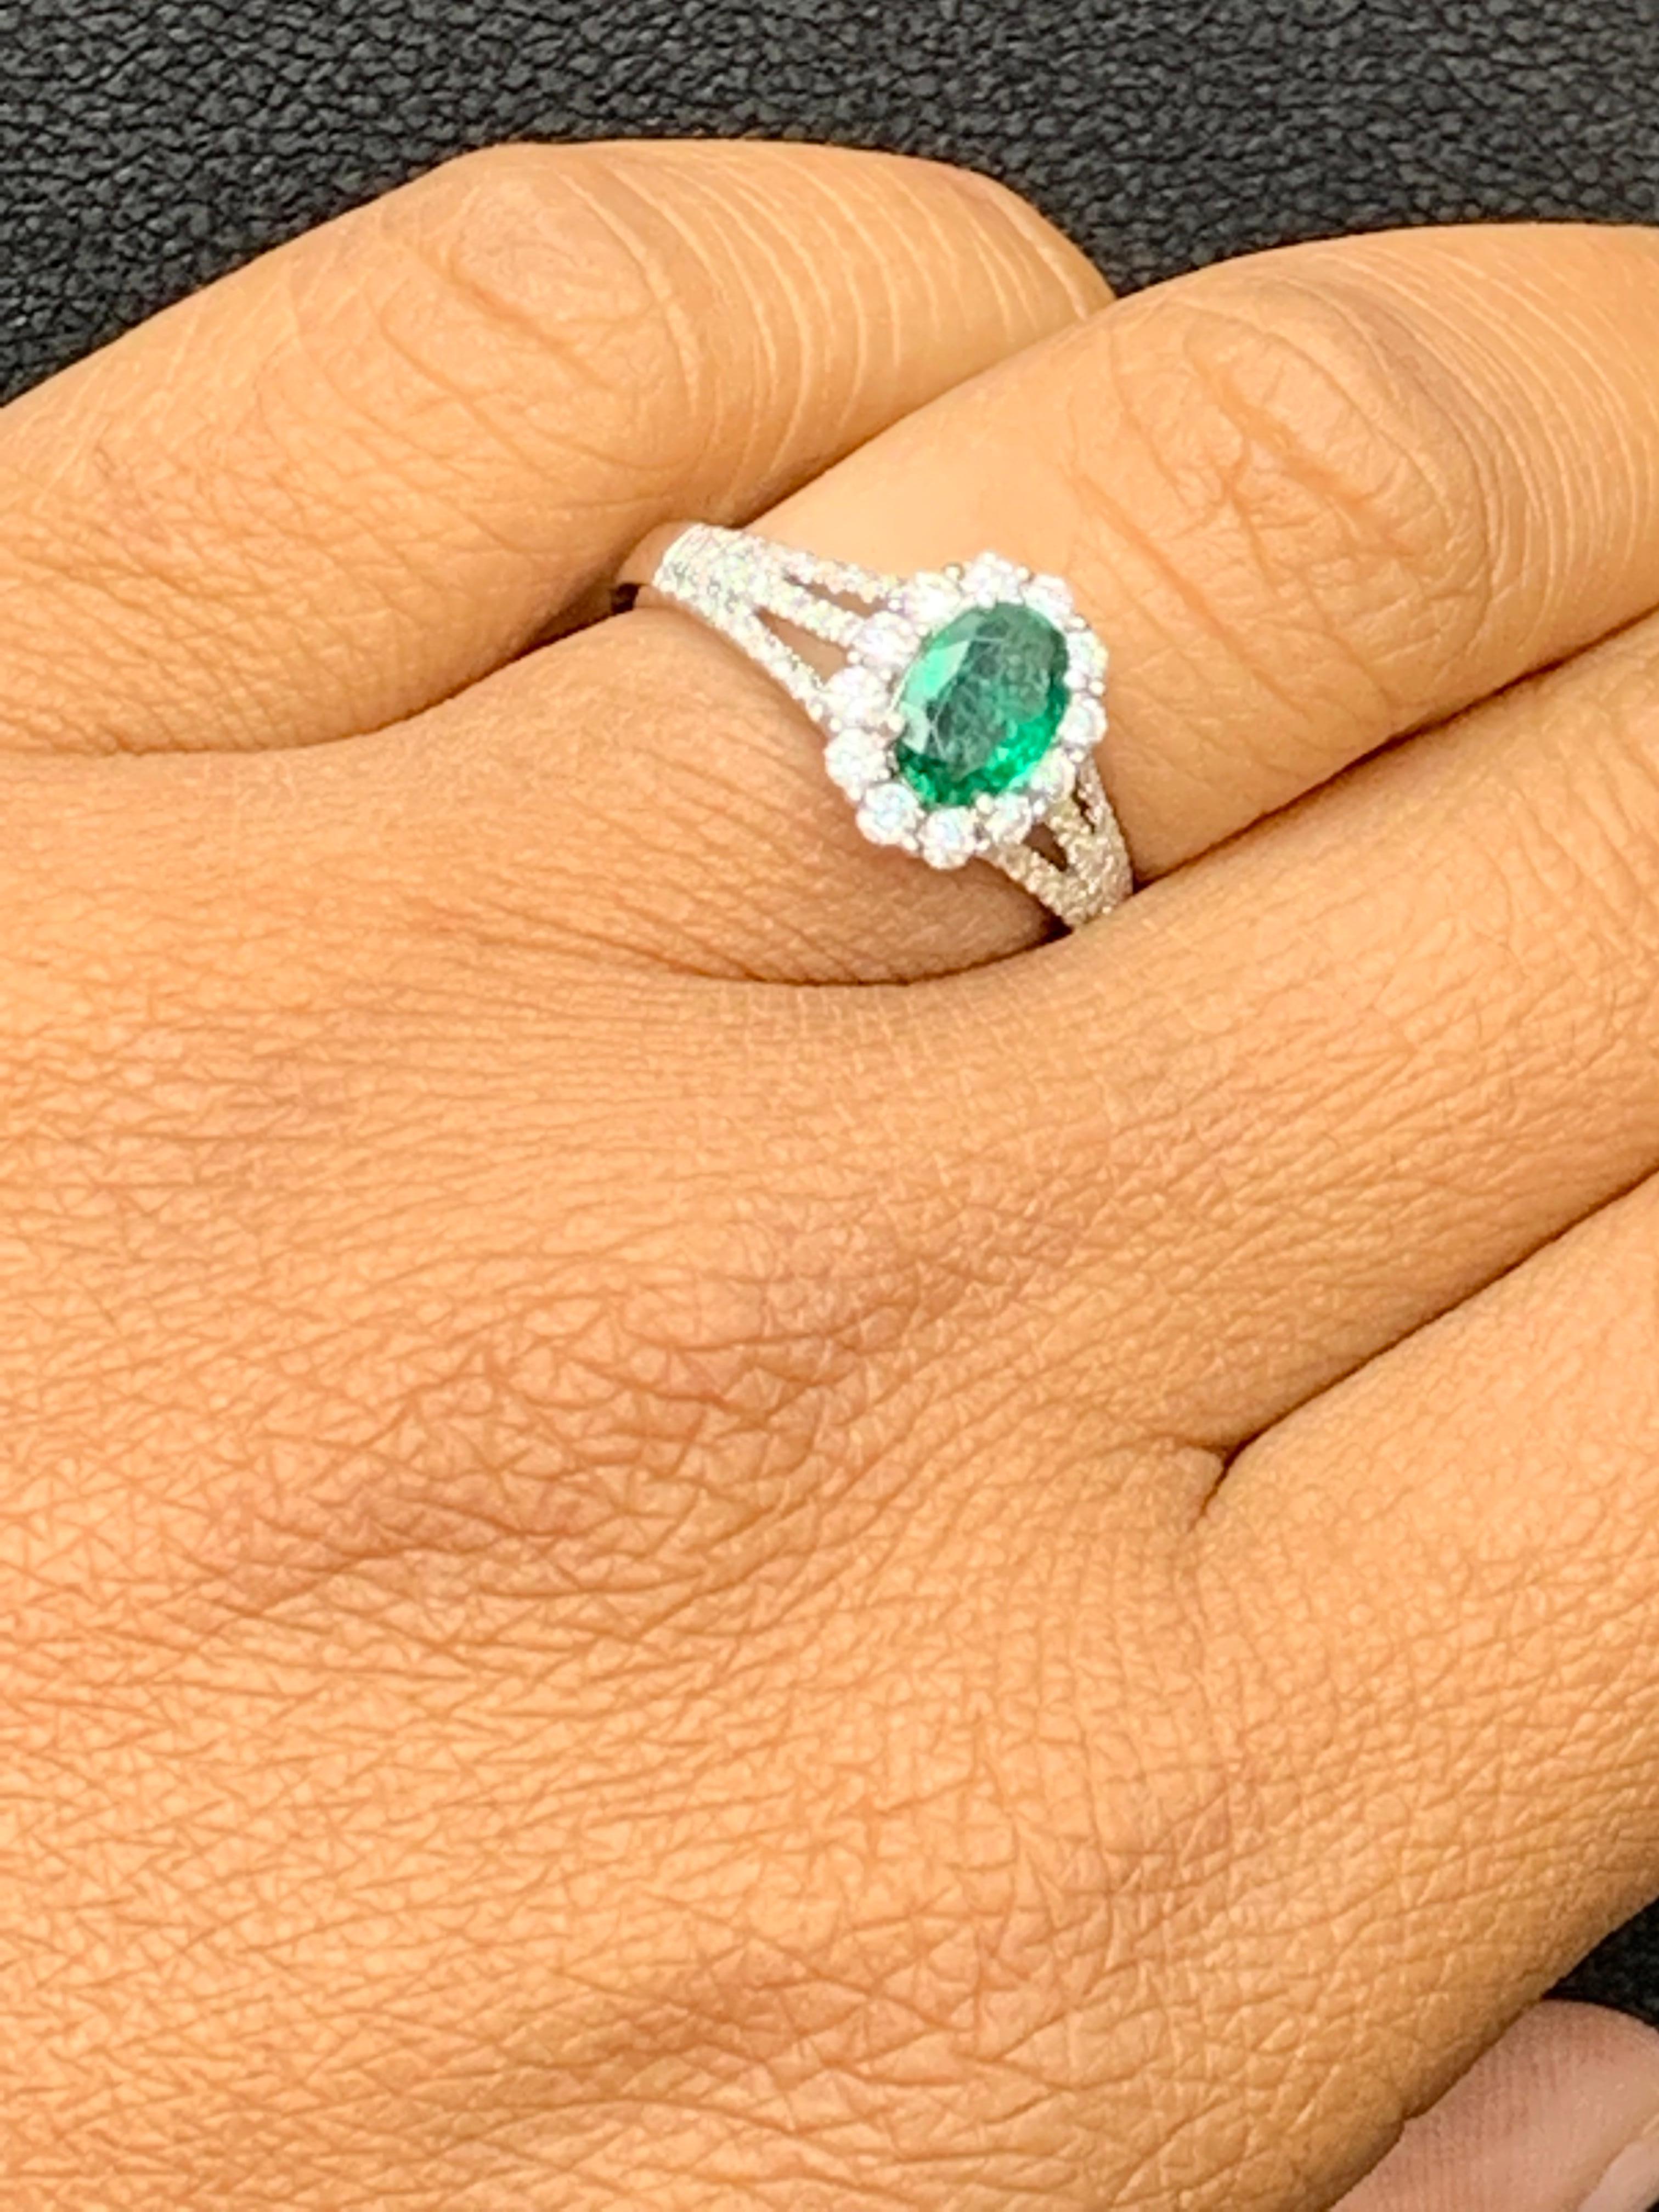 0.73 Carat Oval Cut Emerald and Diamond Fashion Ring in 18K White Gold For Sale 7